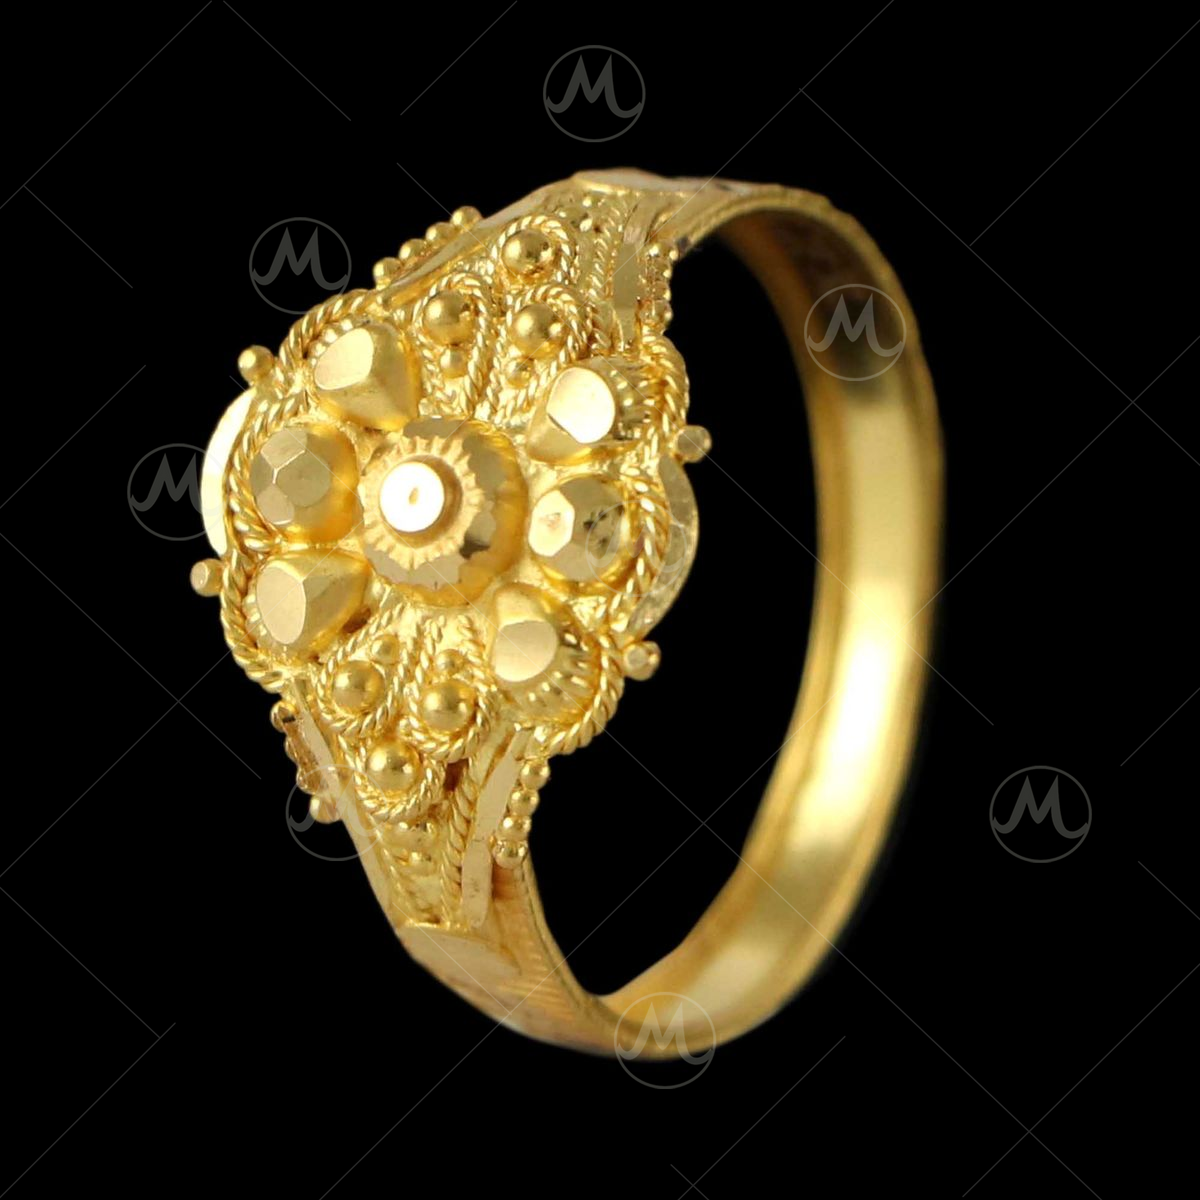 Image of Indian Made Gold Jewellery Gold Ring With Design on it Closeup  Shot-SI758809-Picxy